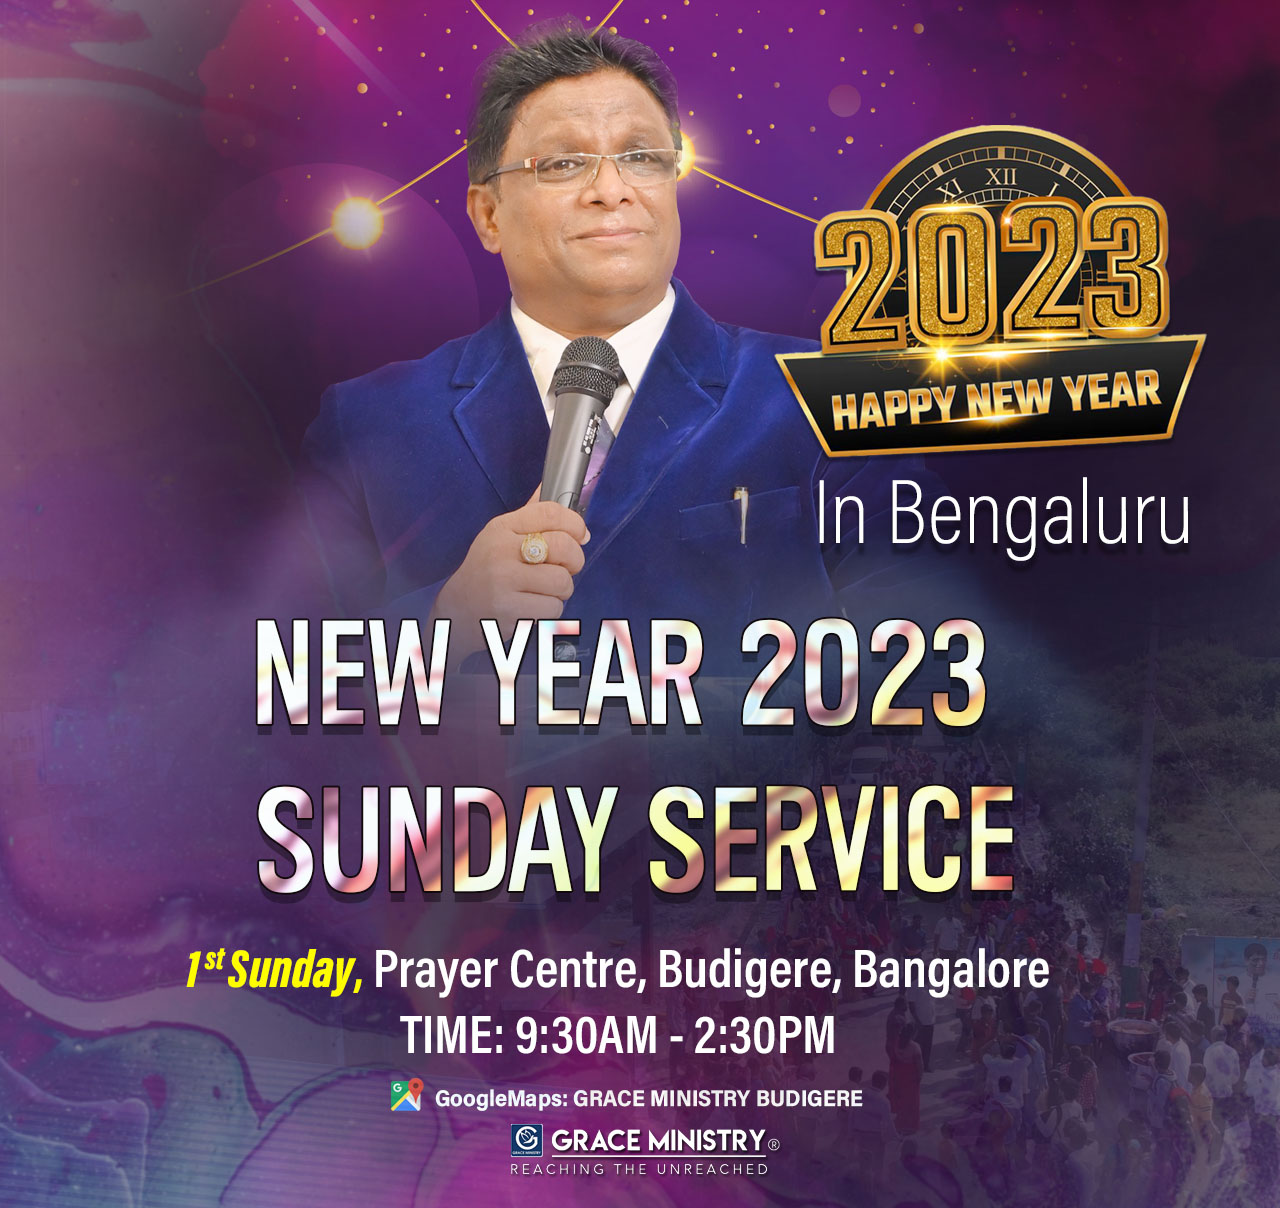 Join the New Year 2023 Blessing Prayer Service in Bangalore by Grace Ministry held on the 1st of Jan, Sunday from 9:30am to 2:30pm at Prayer centre Budigere, Bangalore. Come and be a great blessing and know the promise verse for the year 2023 by the Lord's Servant Bro Andrew Richard.